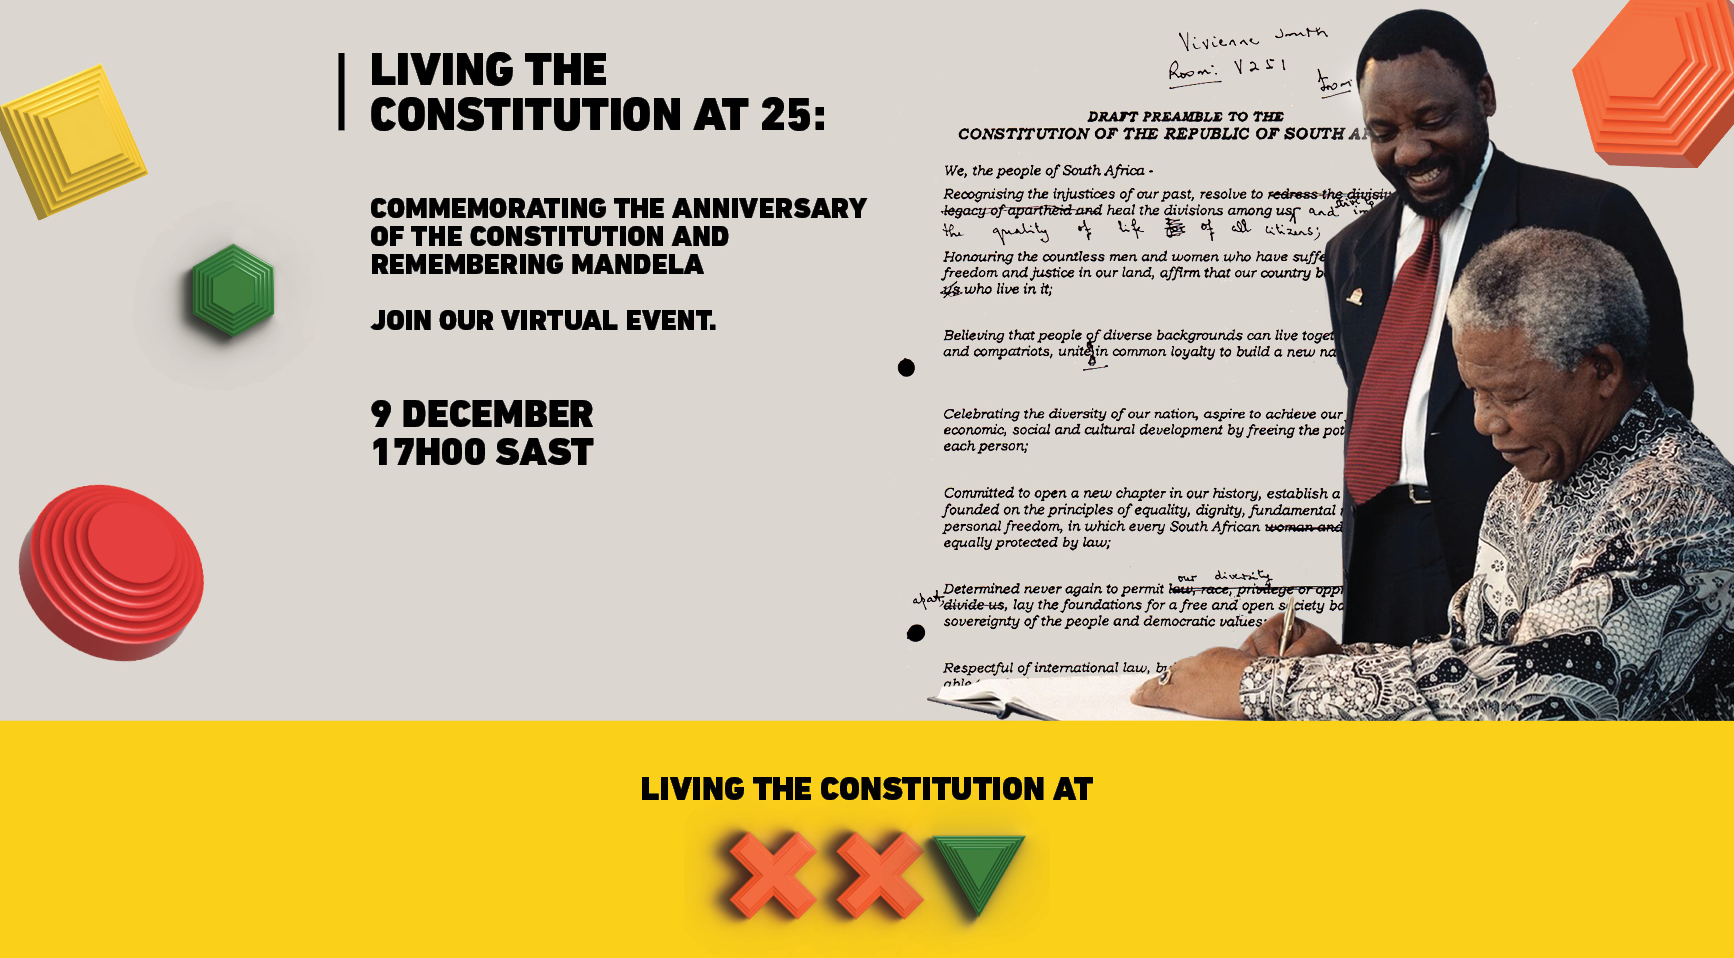 Living the Constitution at 25: Commemorating the anniversary of the Constitution and Remembering Mandela